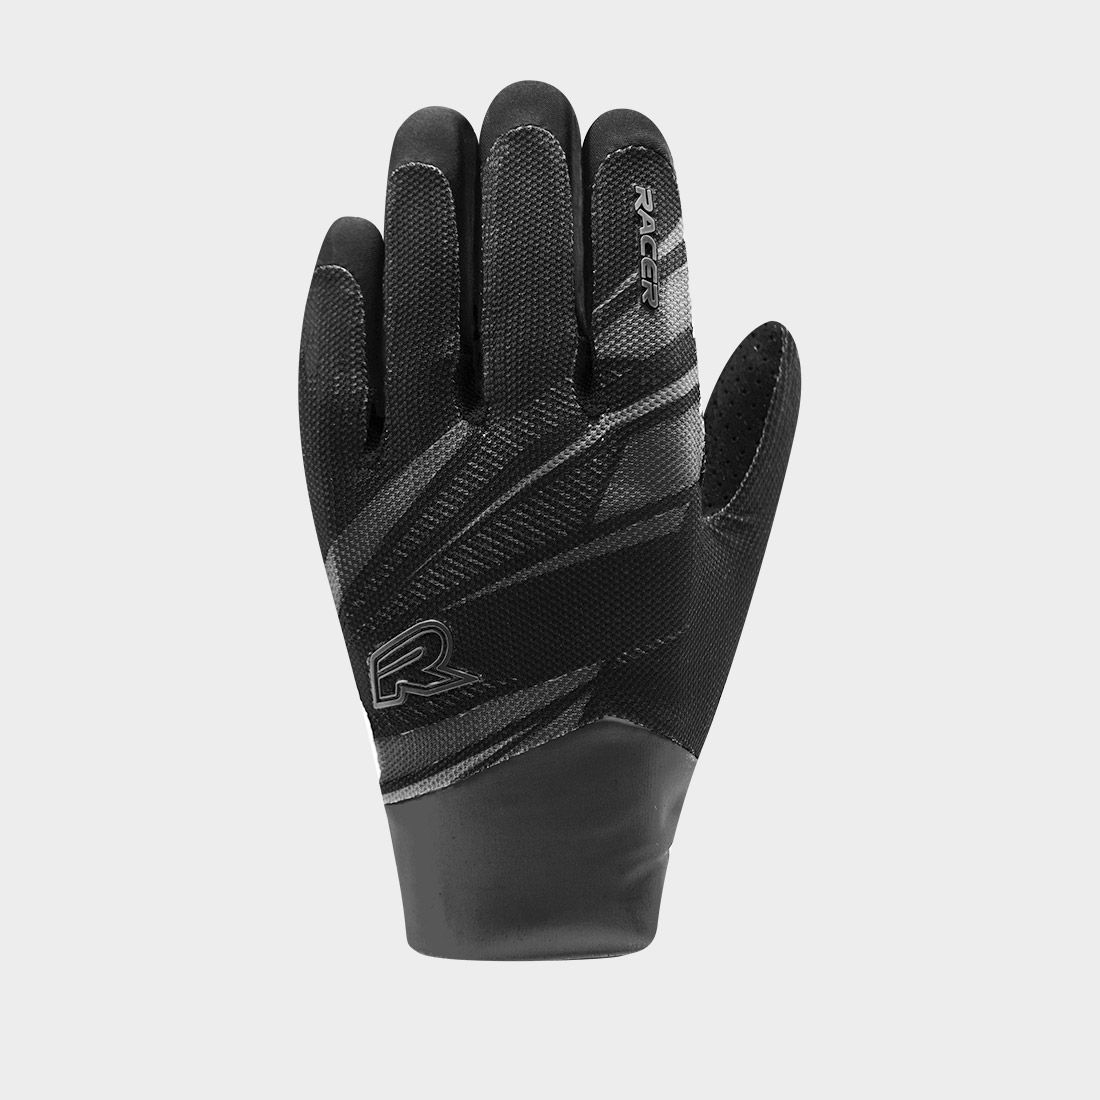 RACERﾂｮ LIGHT SPEED KID Gloves and Bicycle Guards